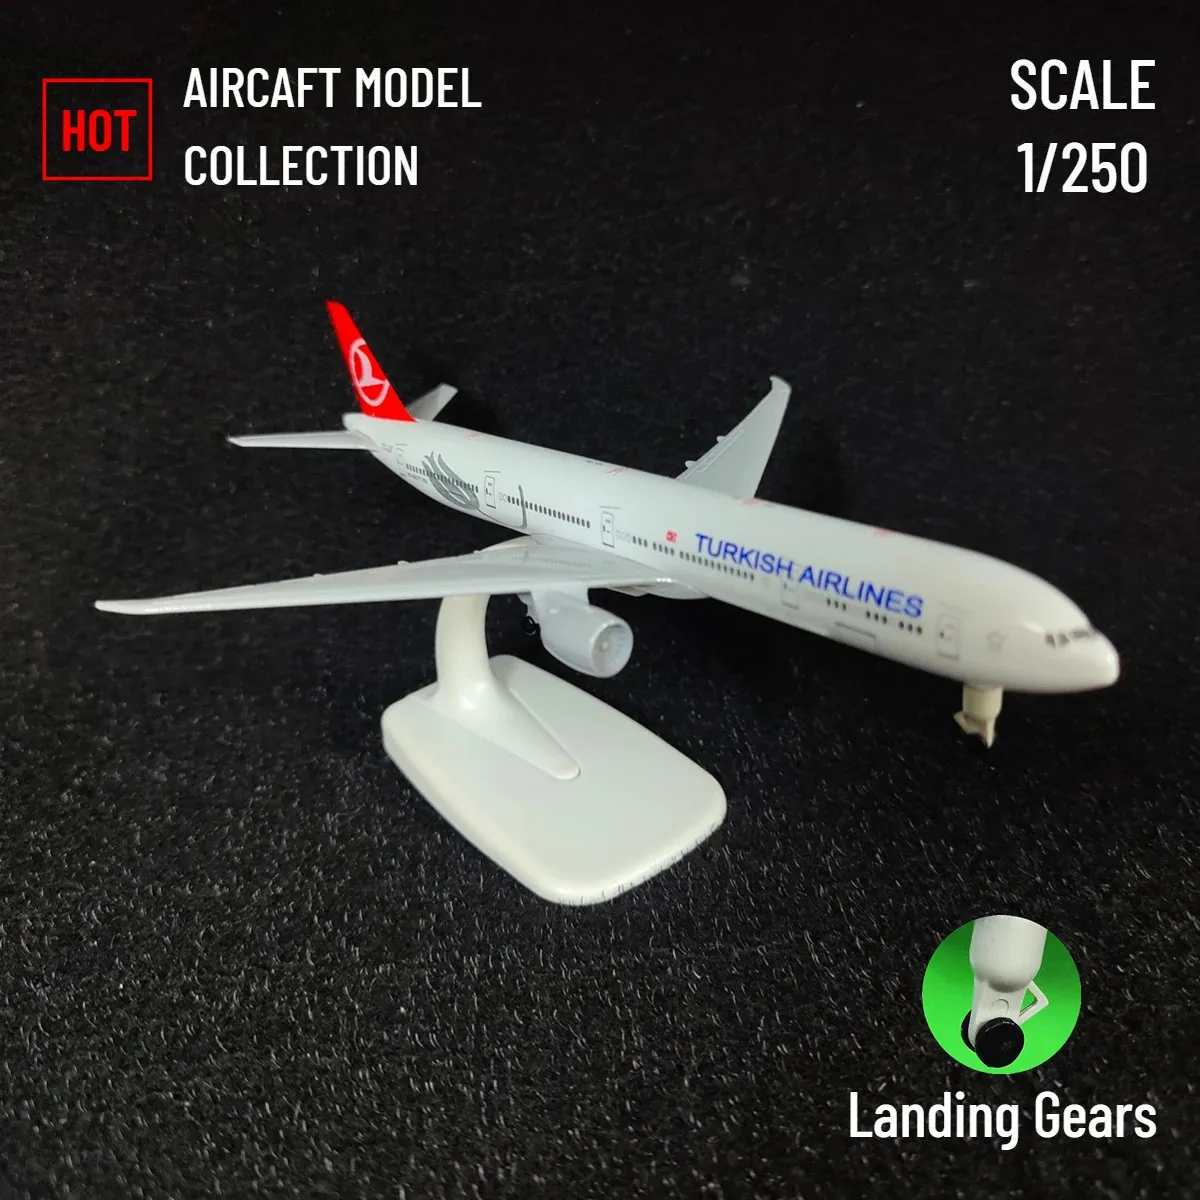 Scale 1 250 Metal Aircraft Model Replica Turkish Airlines B777 Airplane Aviation Decor Miniature Art Collection Kid Boy Toy 240201